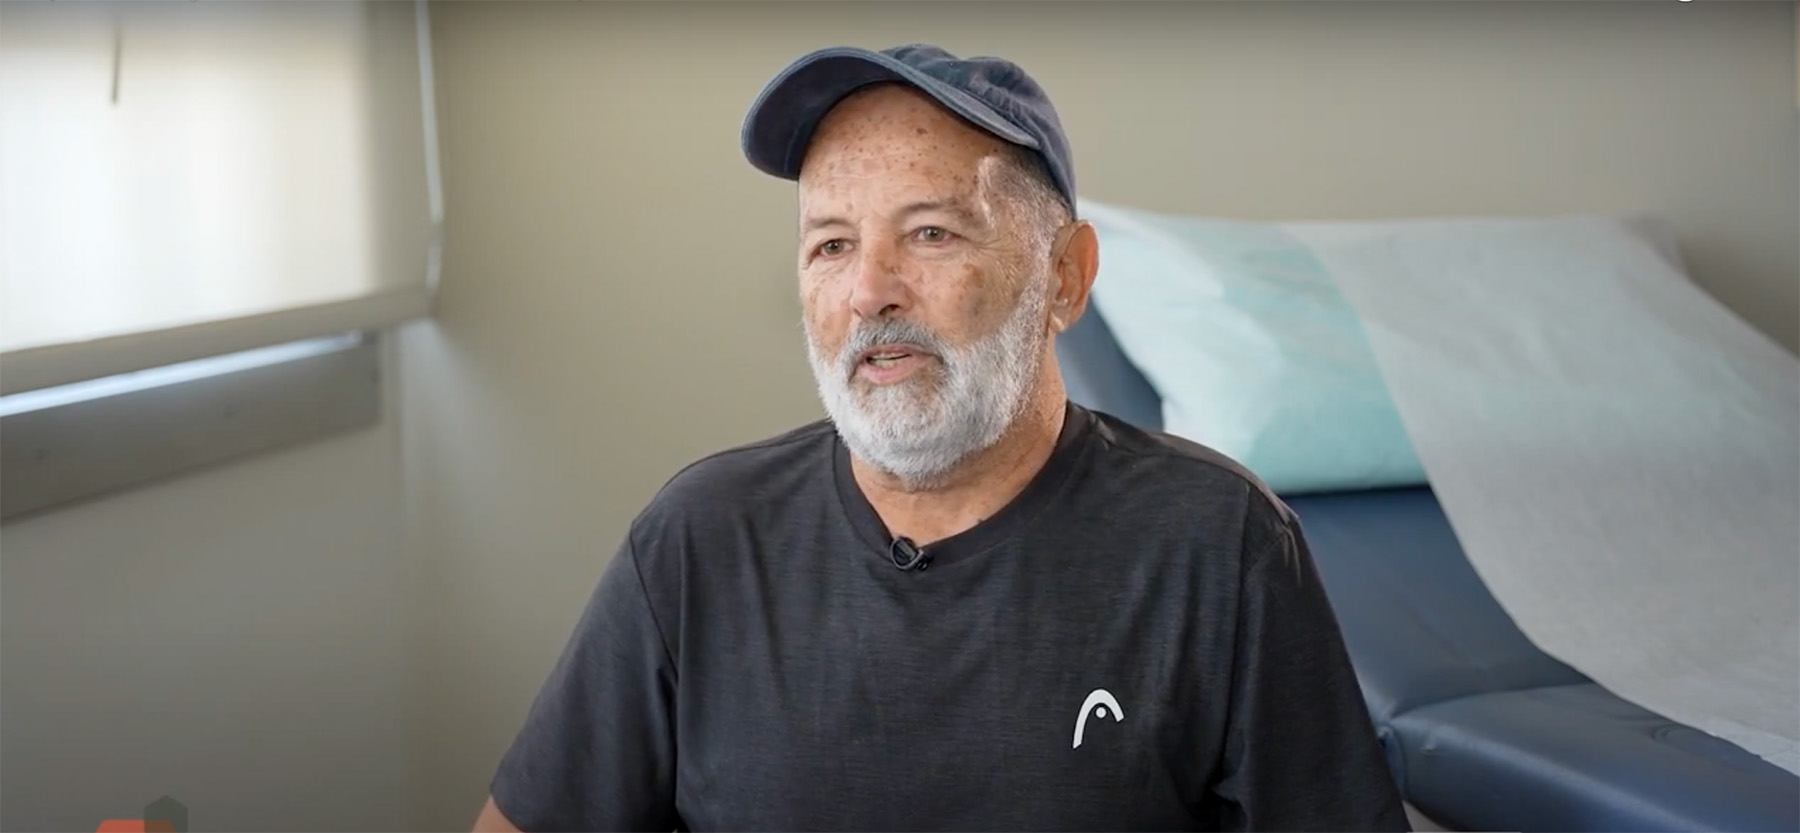 65 year old Henry Perez talks about his PAD treatment to lessen his pain. (Articulo en Espanol.)